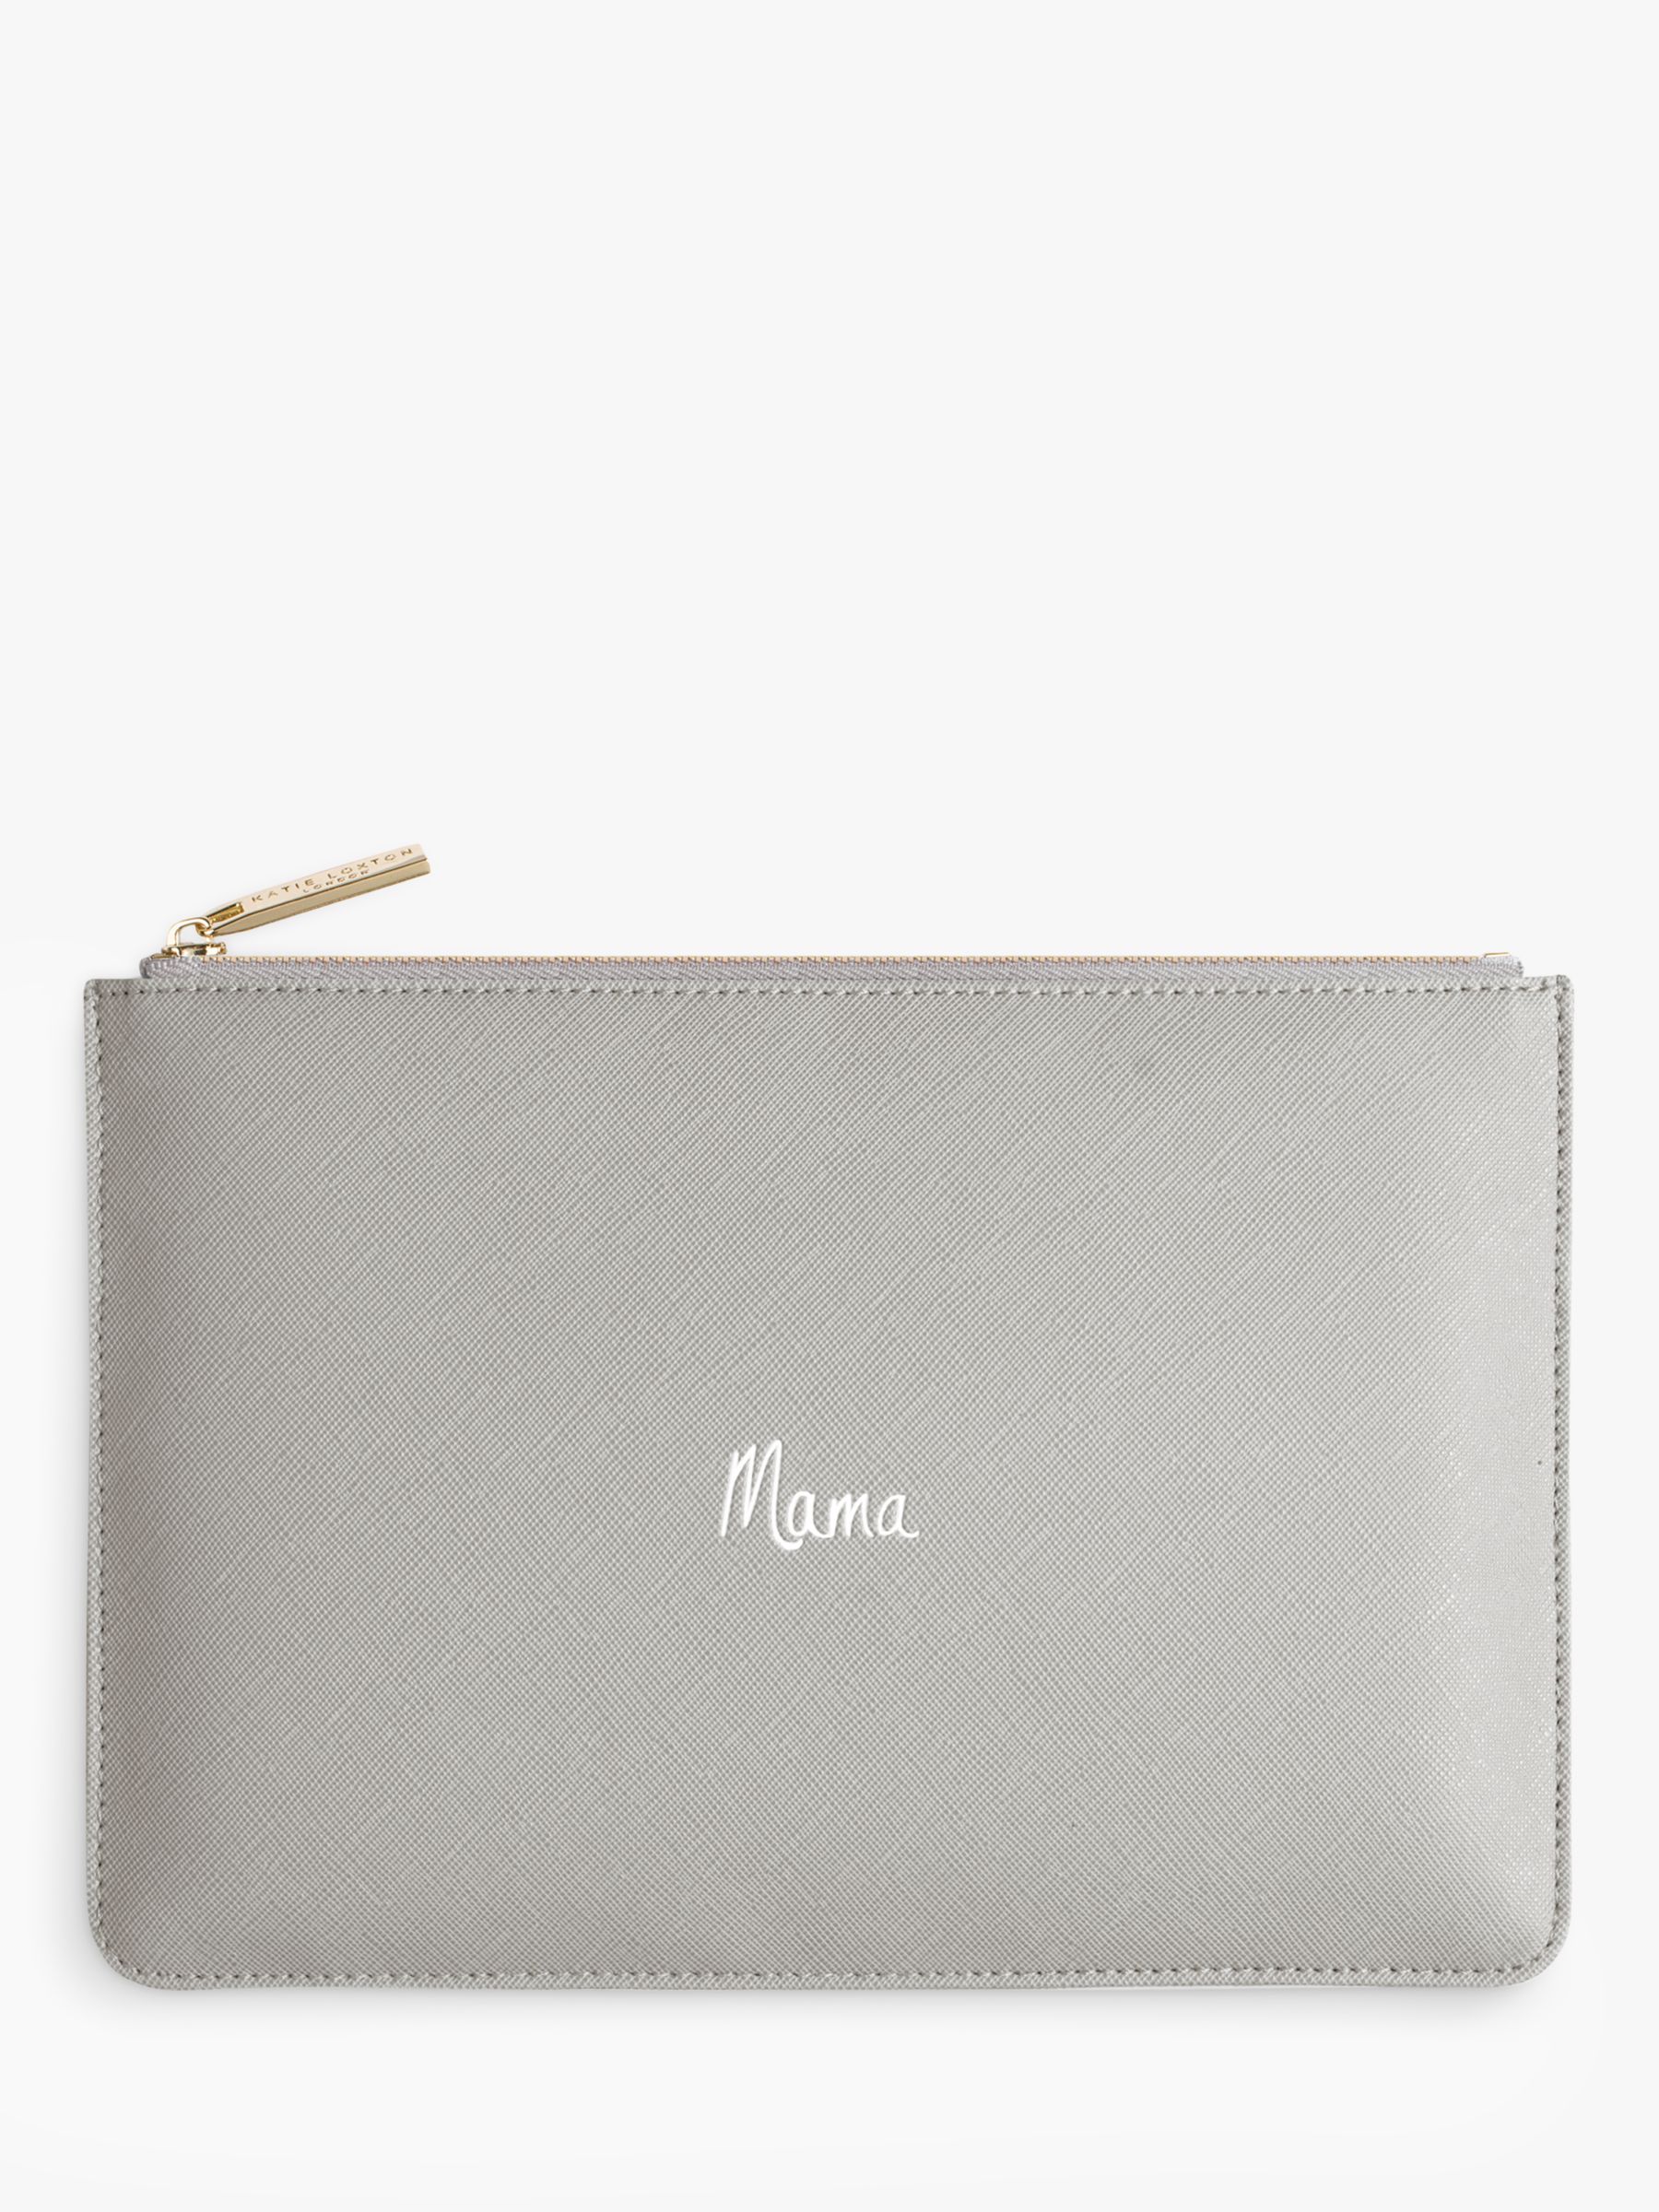 Image of Katie Loxton Mama Perfect Pouch Grey